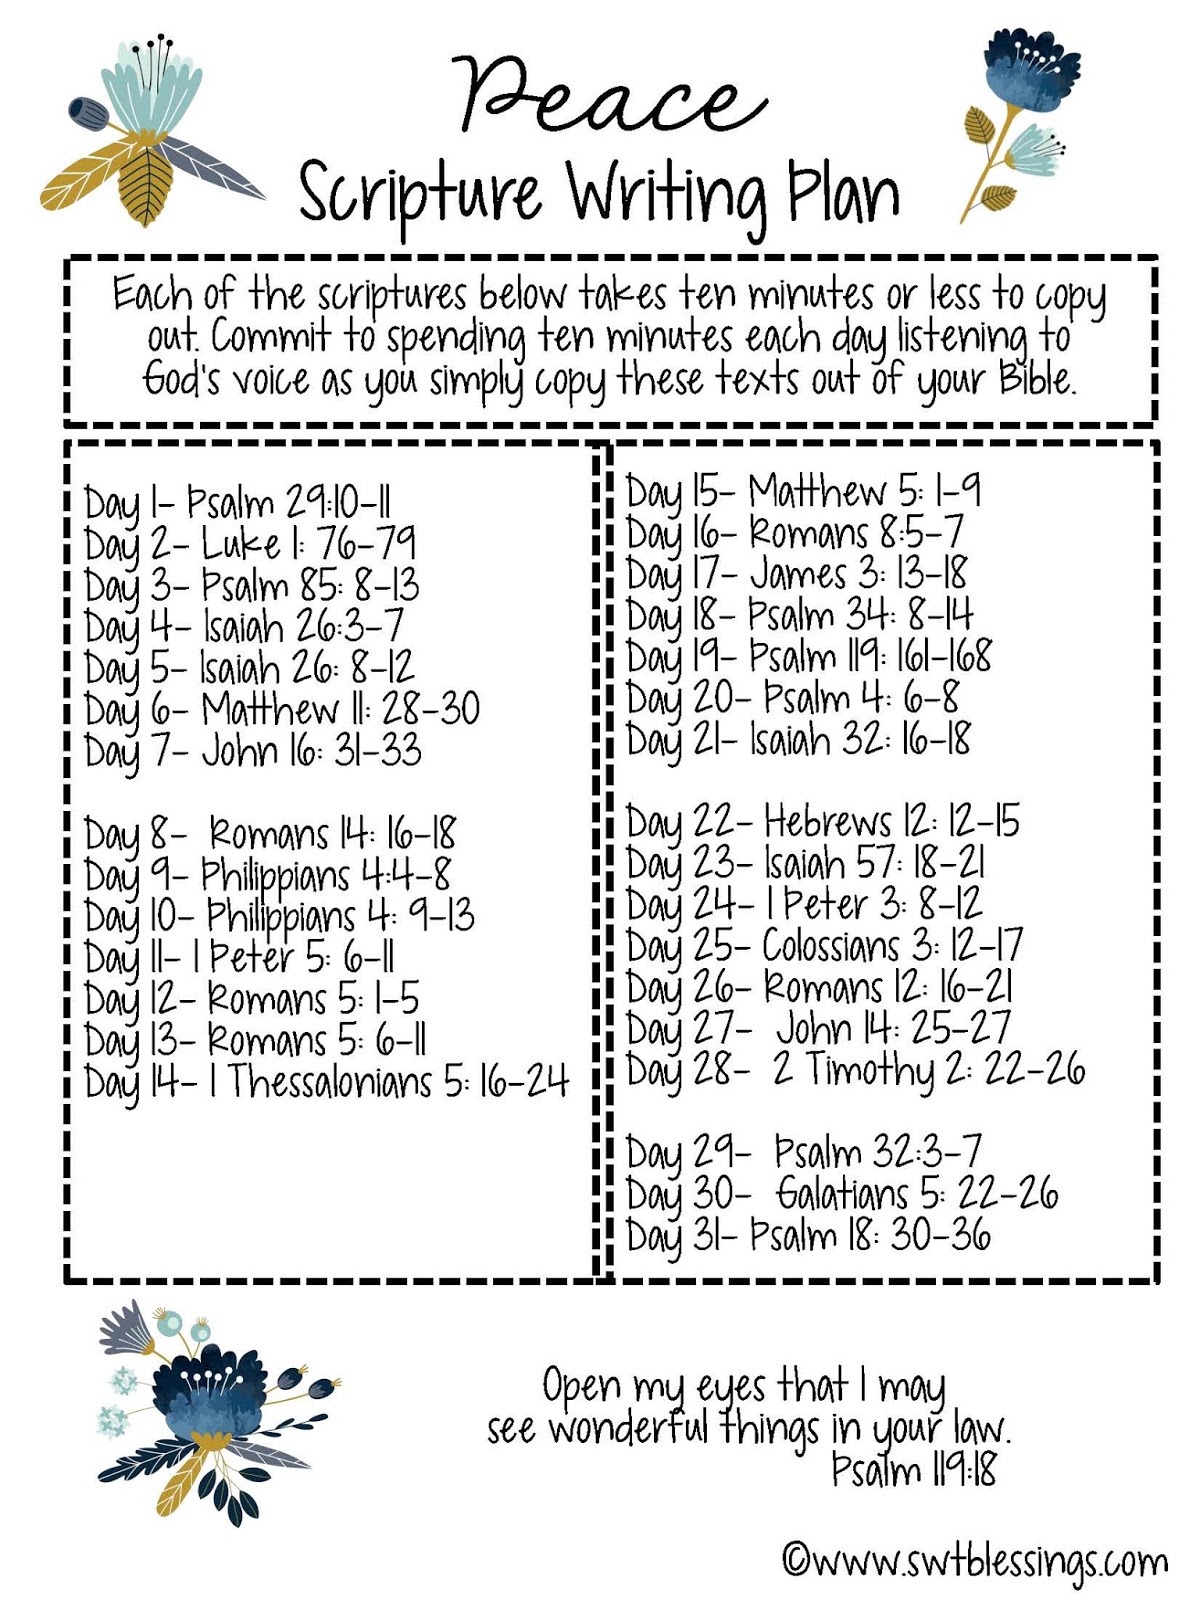 sweet-blessings-february-scripture-writing-plan-peace